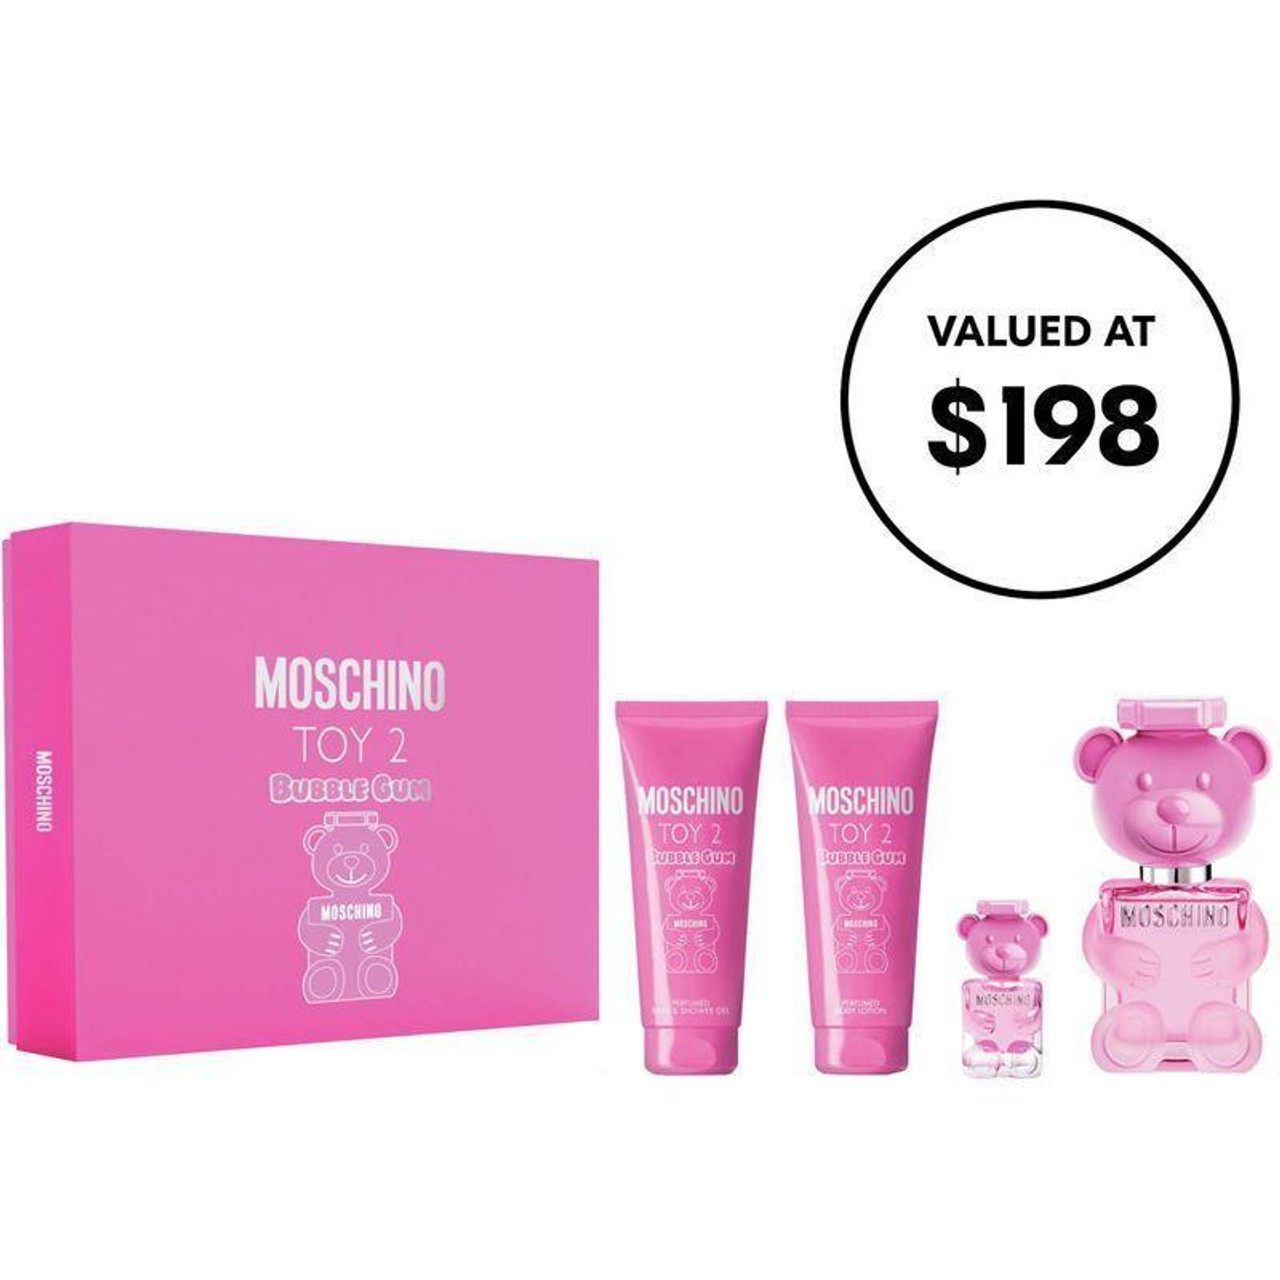 Moschino Bubble Gum Toy2 set - Hollywood Style Perfumes